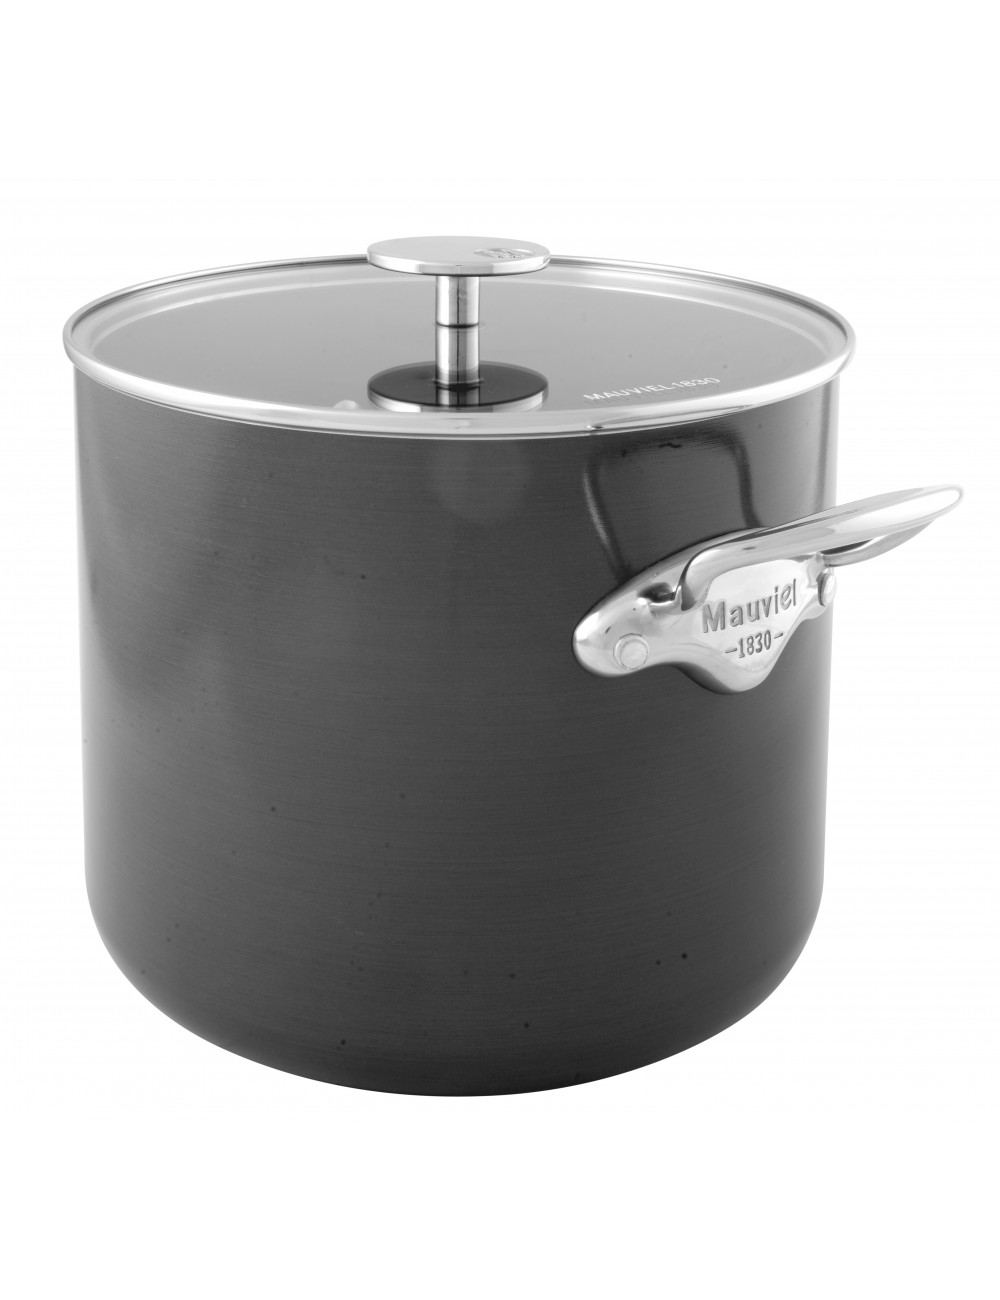 STOCK POT WITH LID D24 INDUCTION - SYMPHONY-COOKING UTENSIL